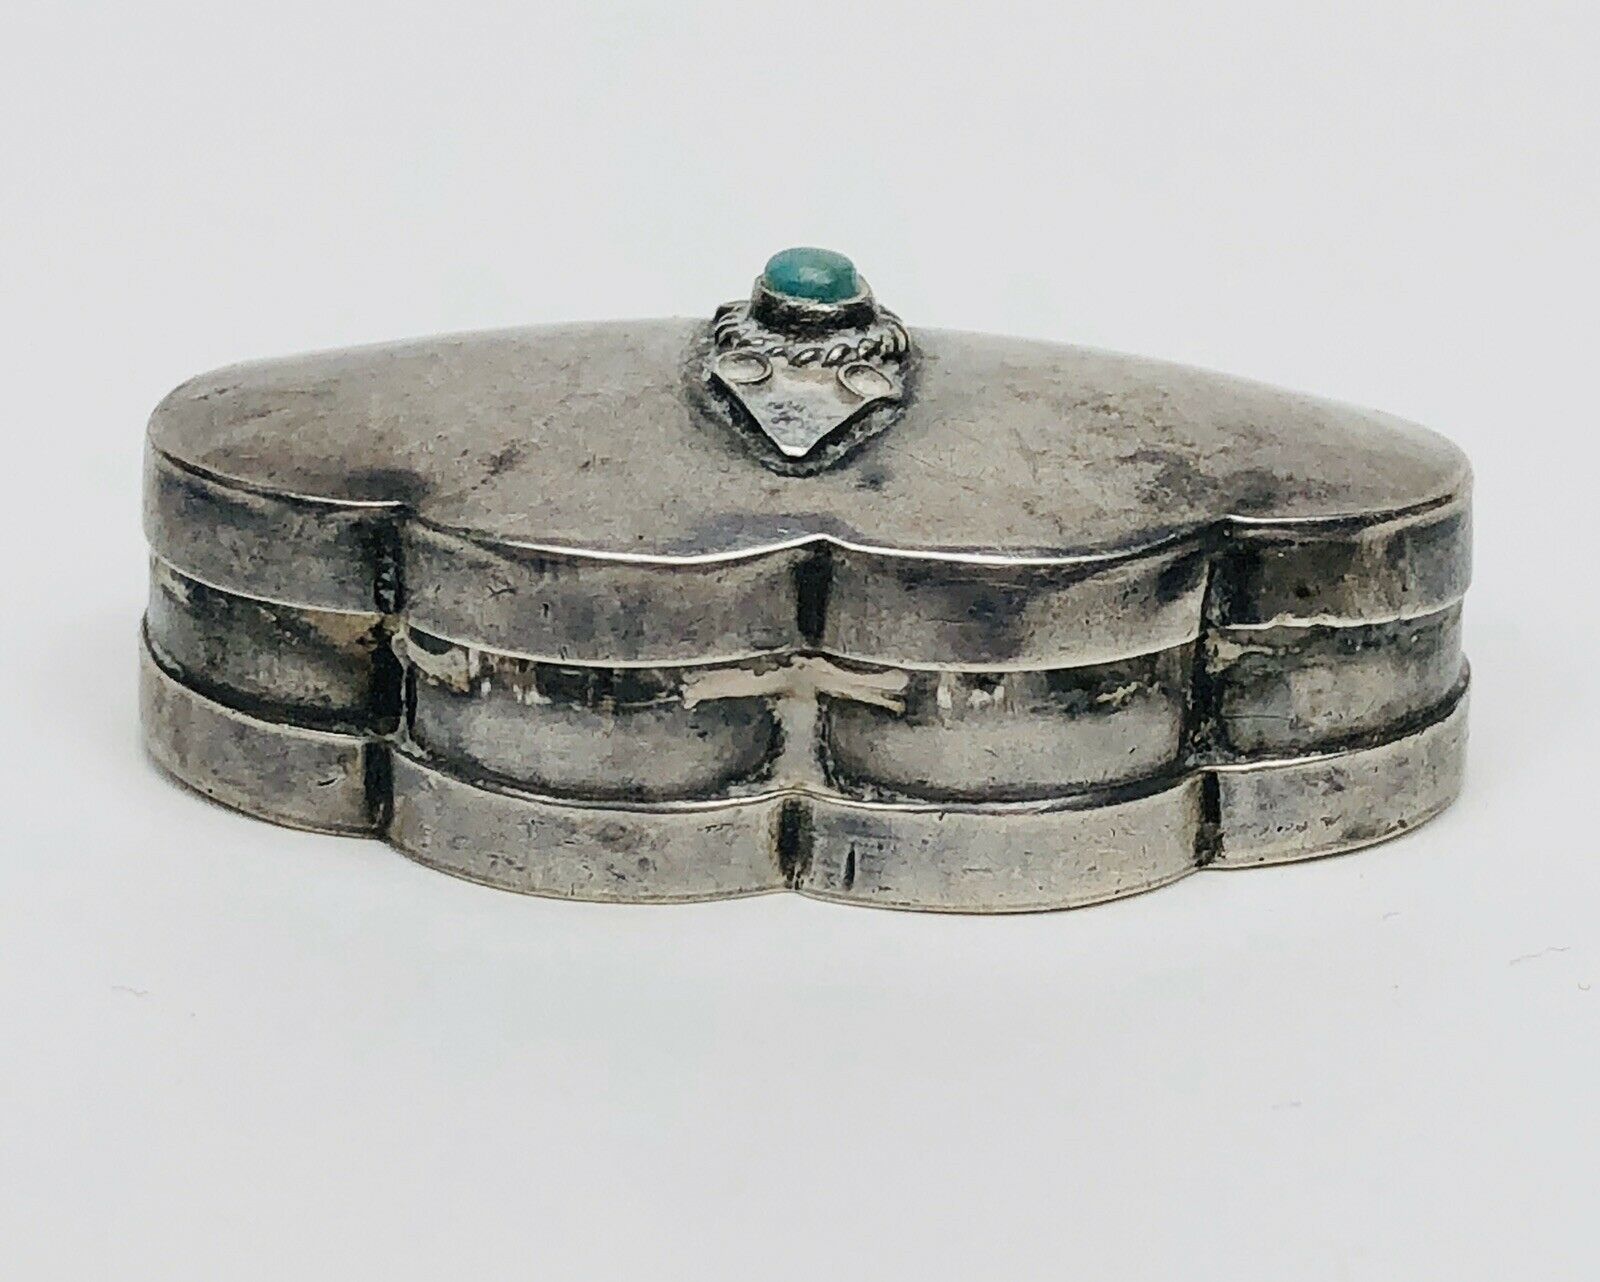 Vintage Signed Mexico Sterling Silver Turquoise Snuff Pill Box